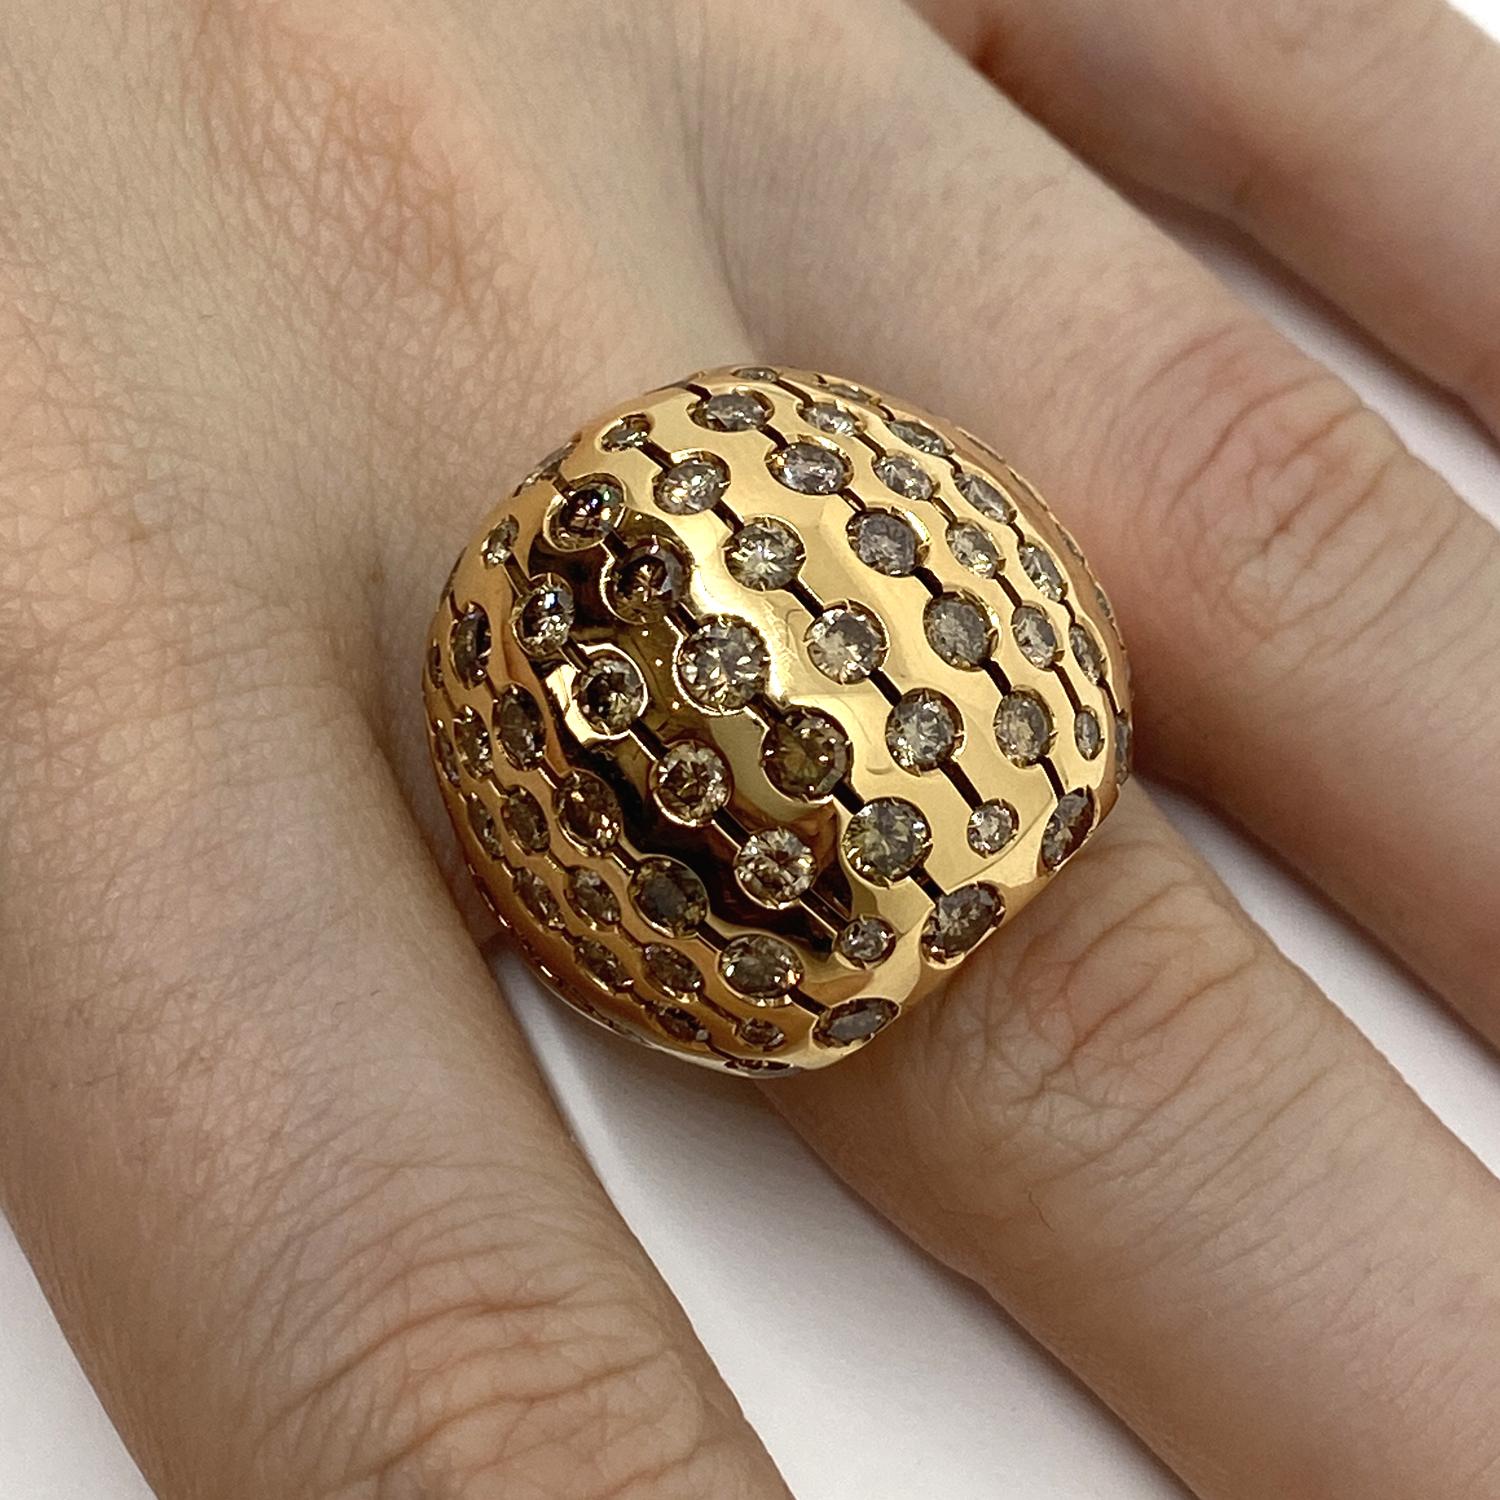 Ring made of 18 kt rose gold with natural brown brilliant-cut diamonds for ct.6.53

Welcome to our jewelry collection, where every piece tells a story of timeless elegance and unparalleled craftsmanship. As a family-run business in Italy for over